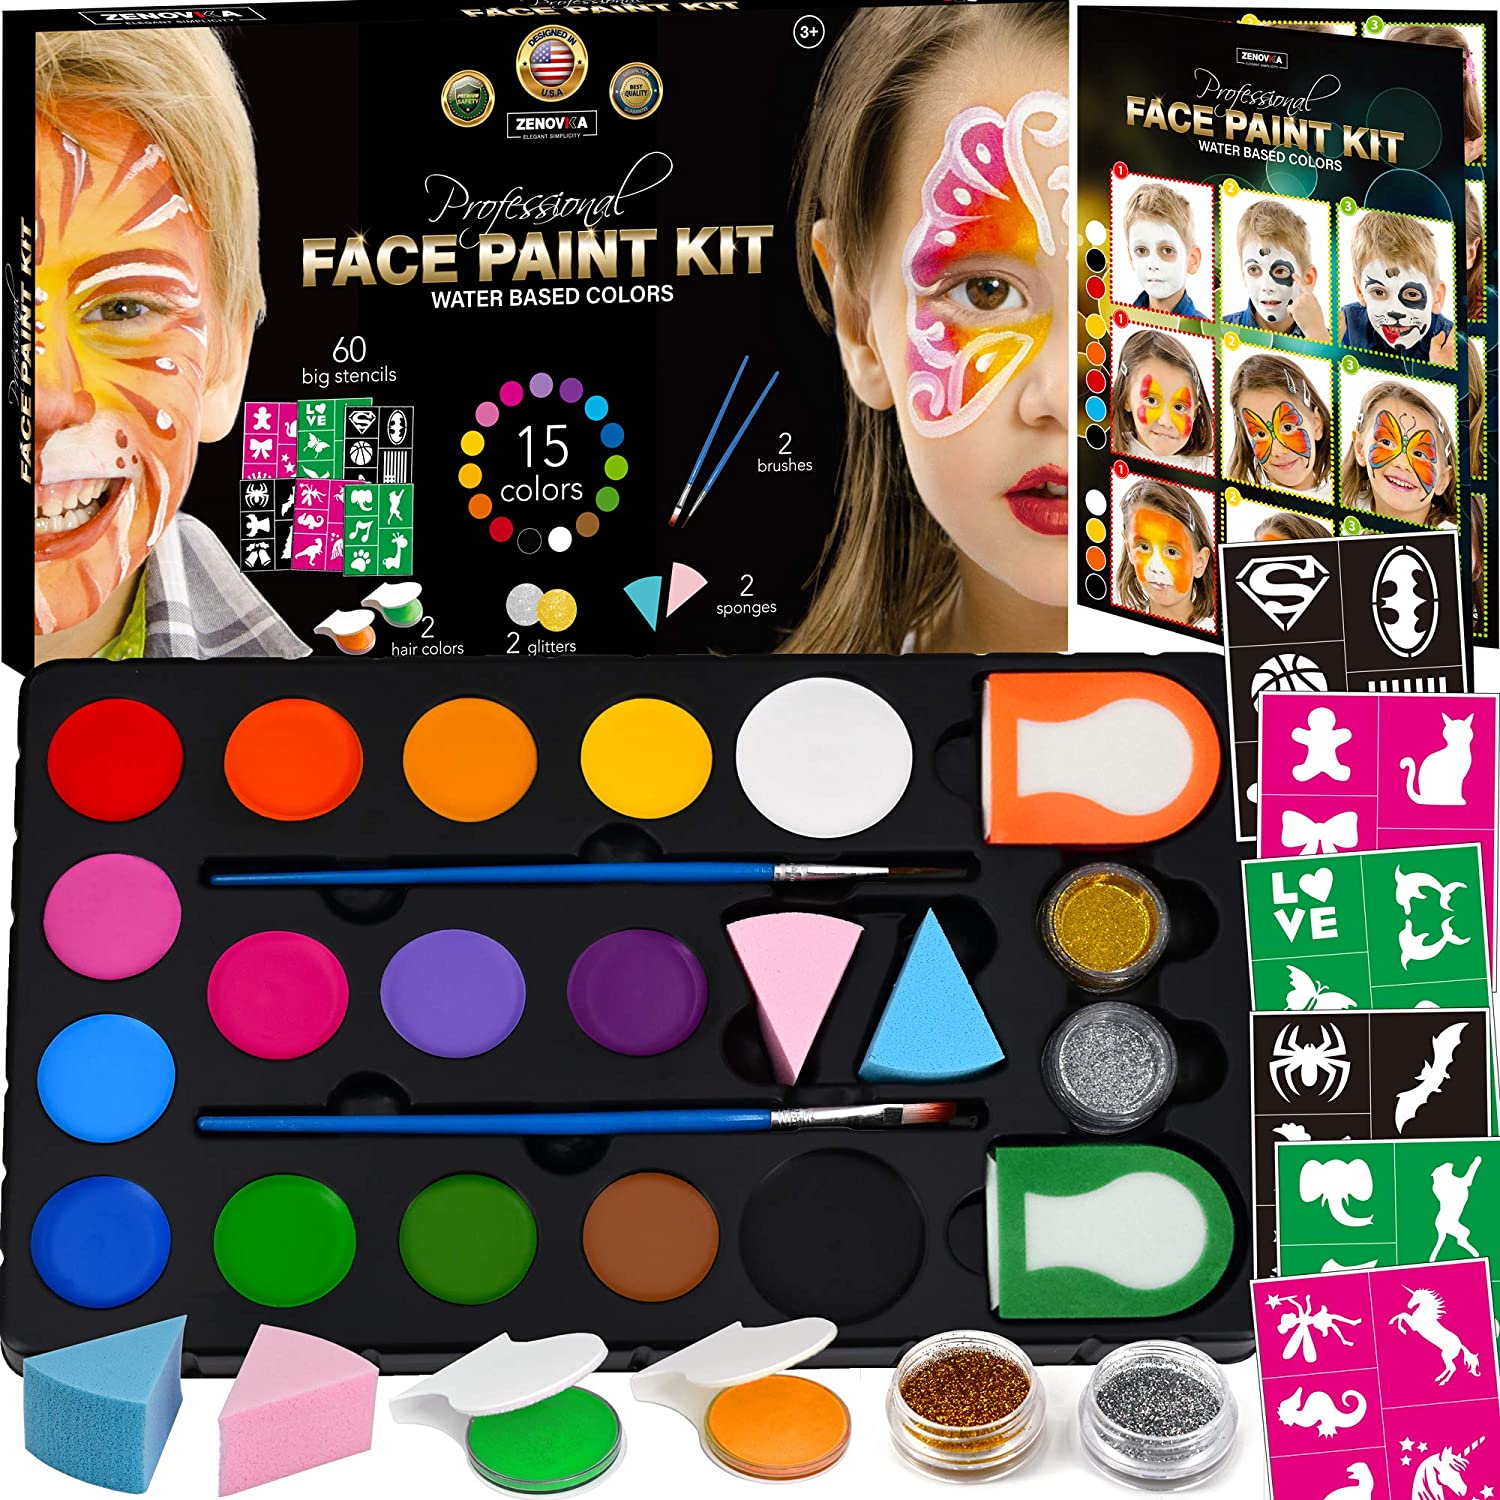 Editorial - Face It: Get Creative With the Right Halloween Face Paint